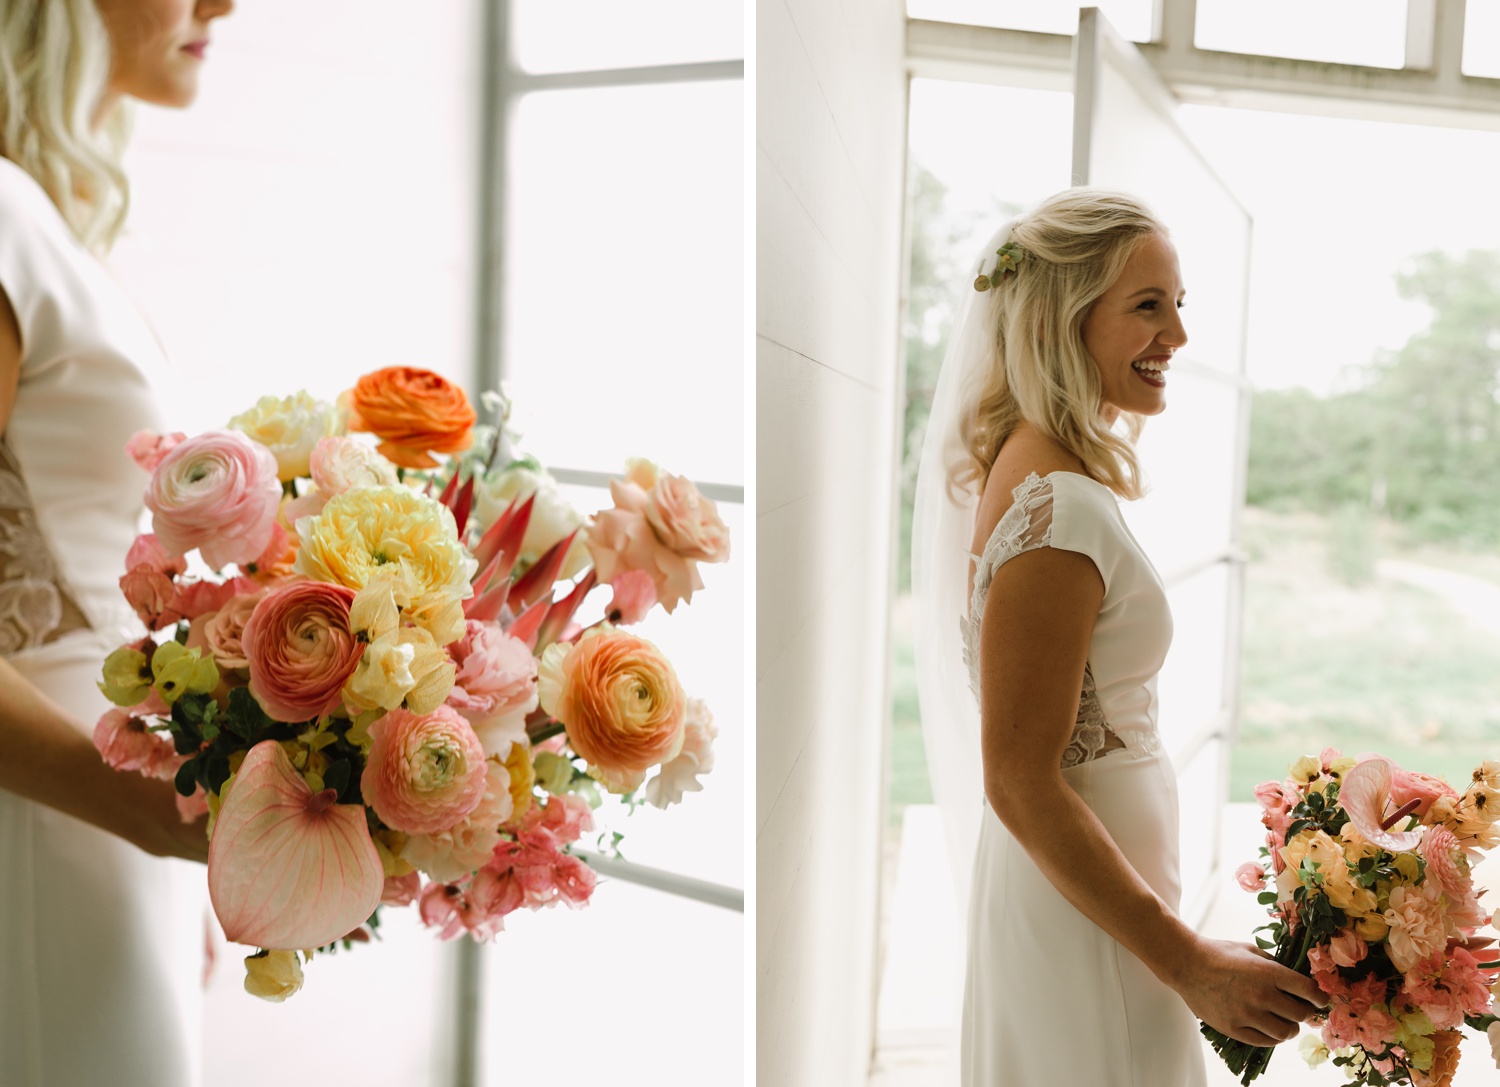 Bridal bouquet filled with roses, peonies, and pink anthurium by Remi and Gold